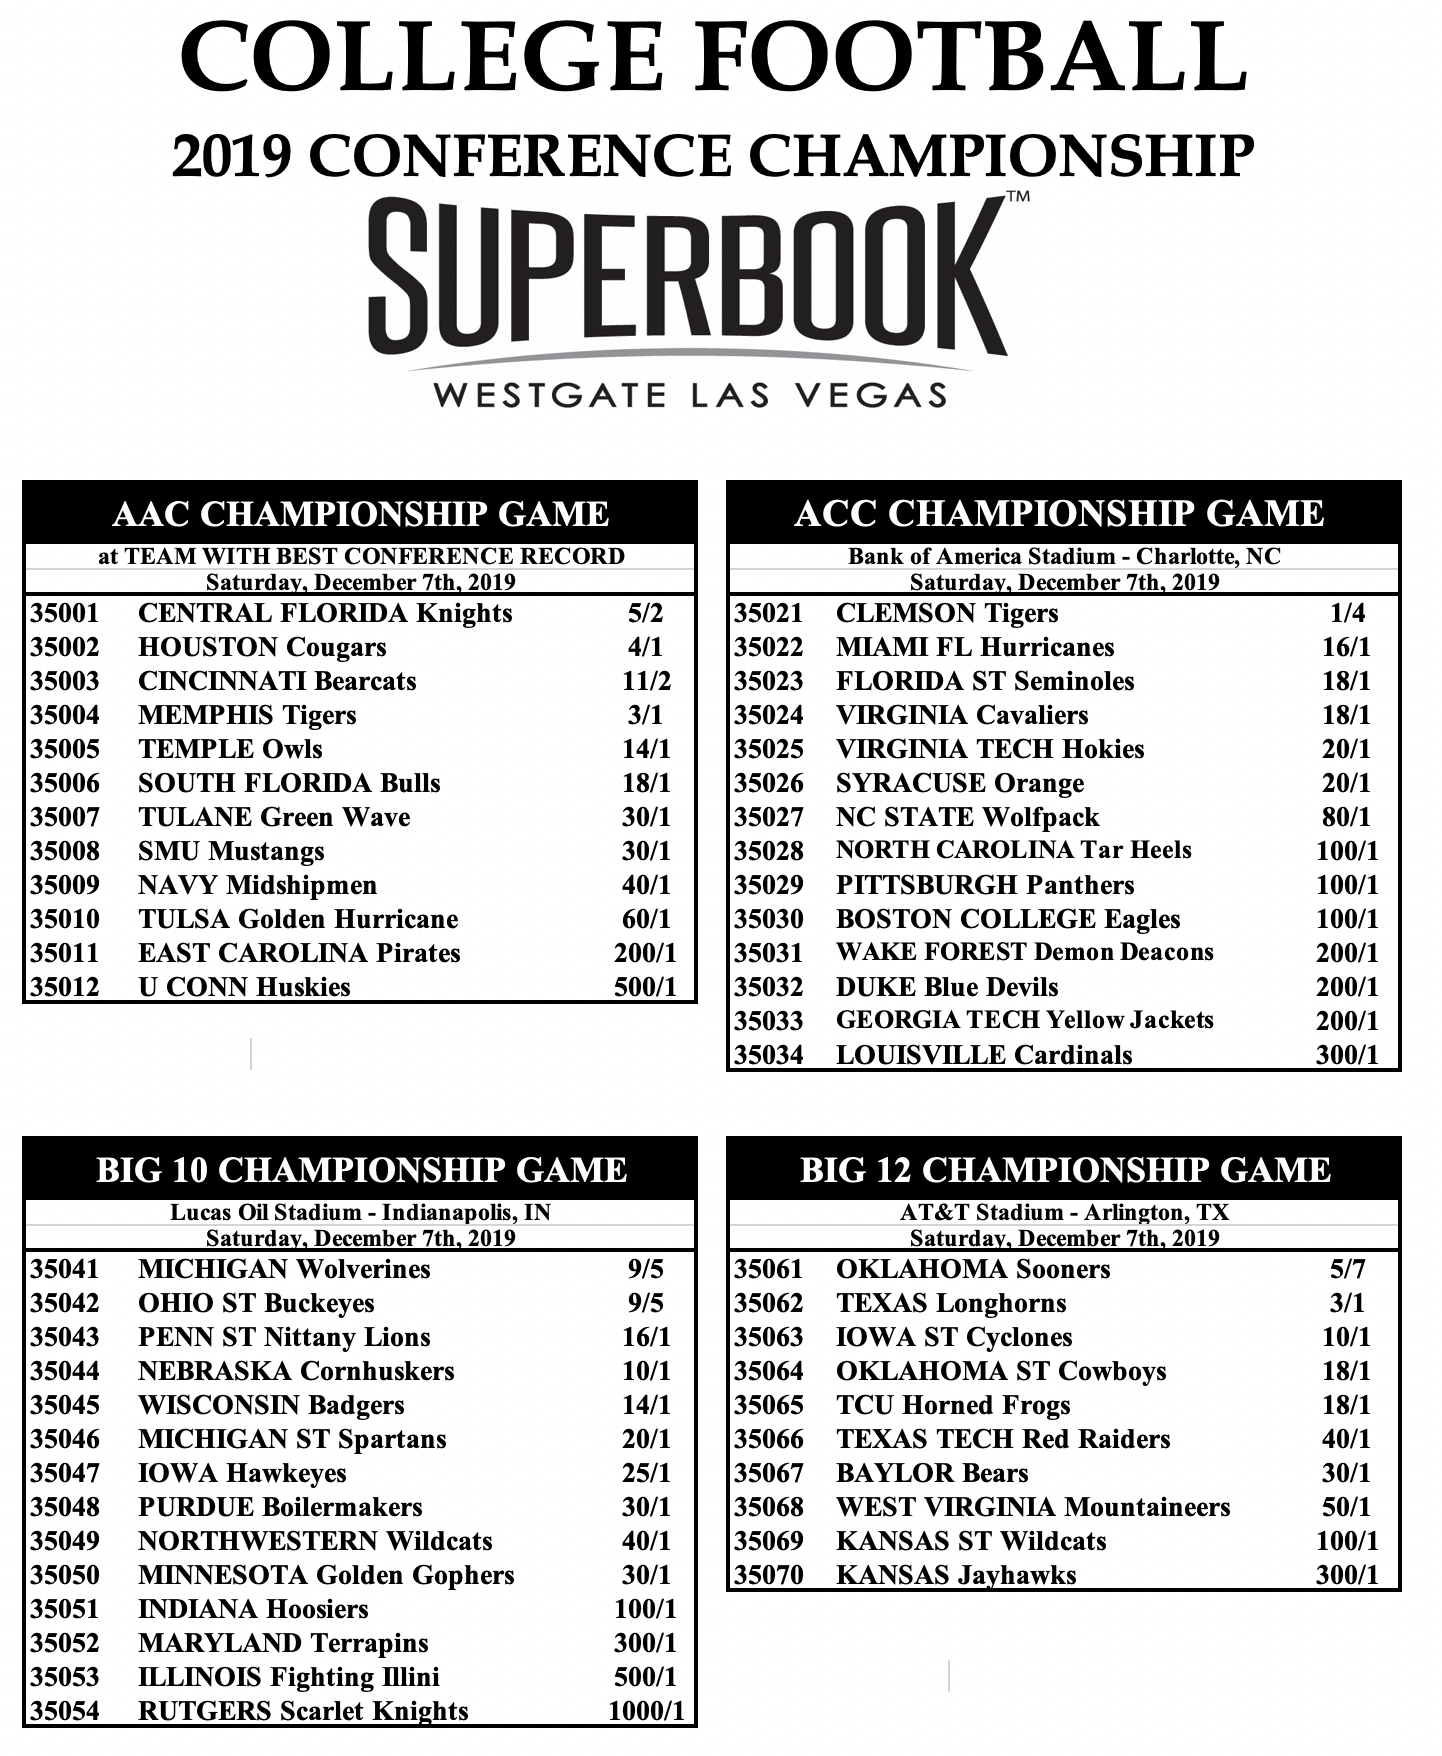 2019 Conference Championship Odds updated.